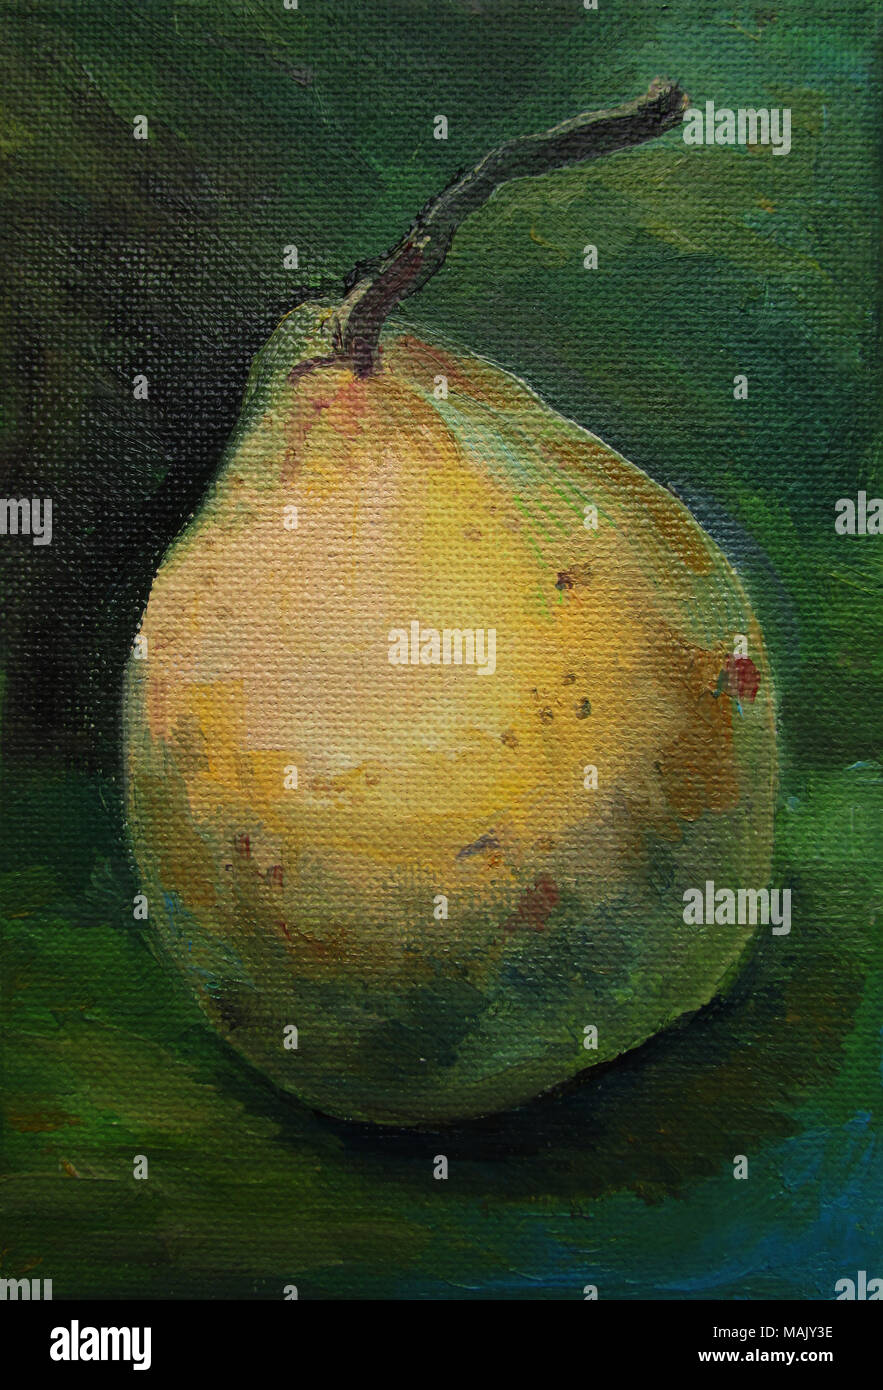 Oil Painting of a yellow Pear Stock Photo